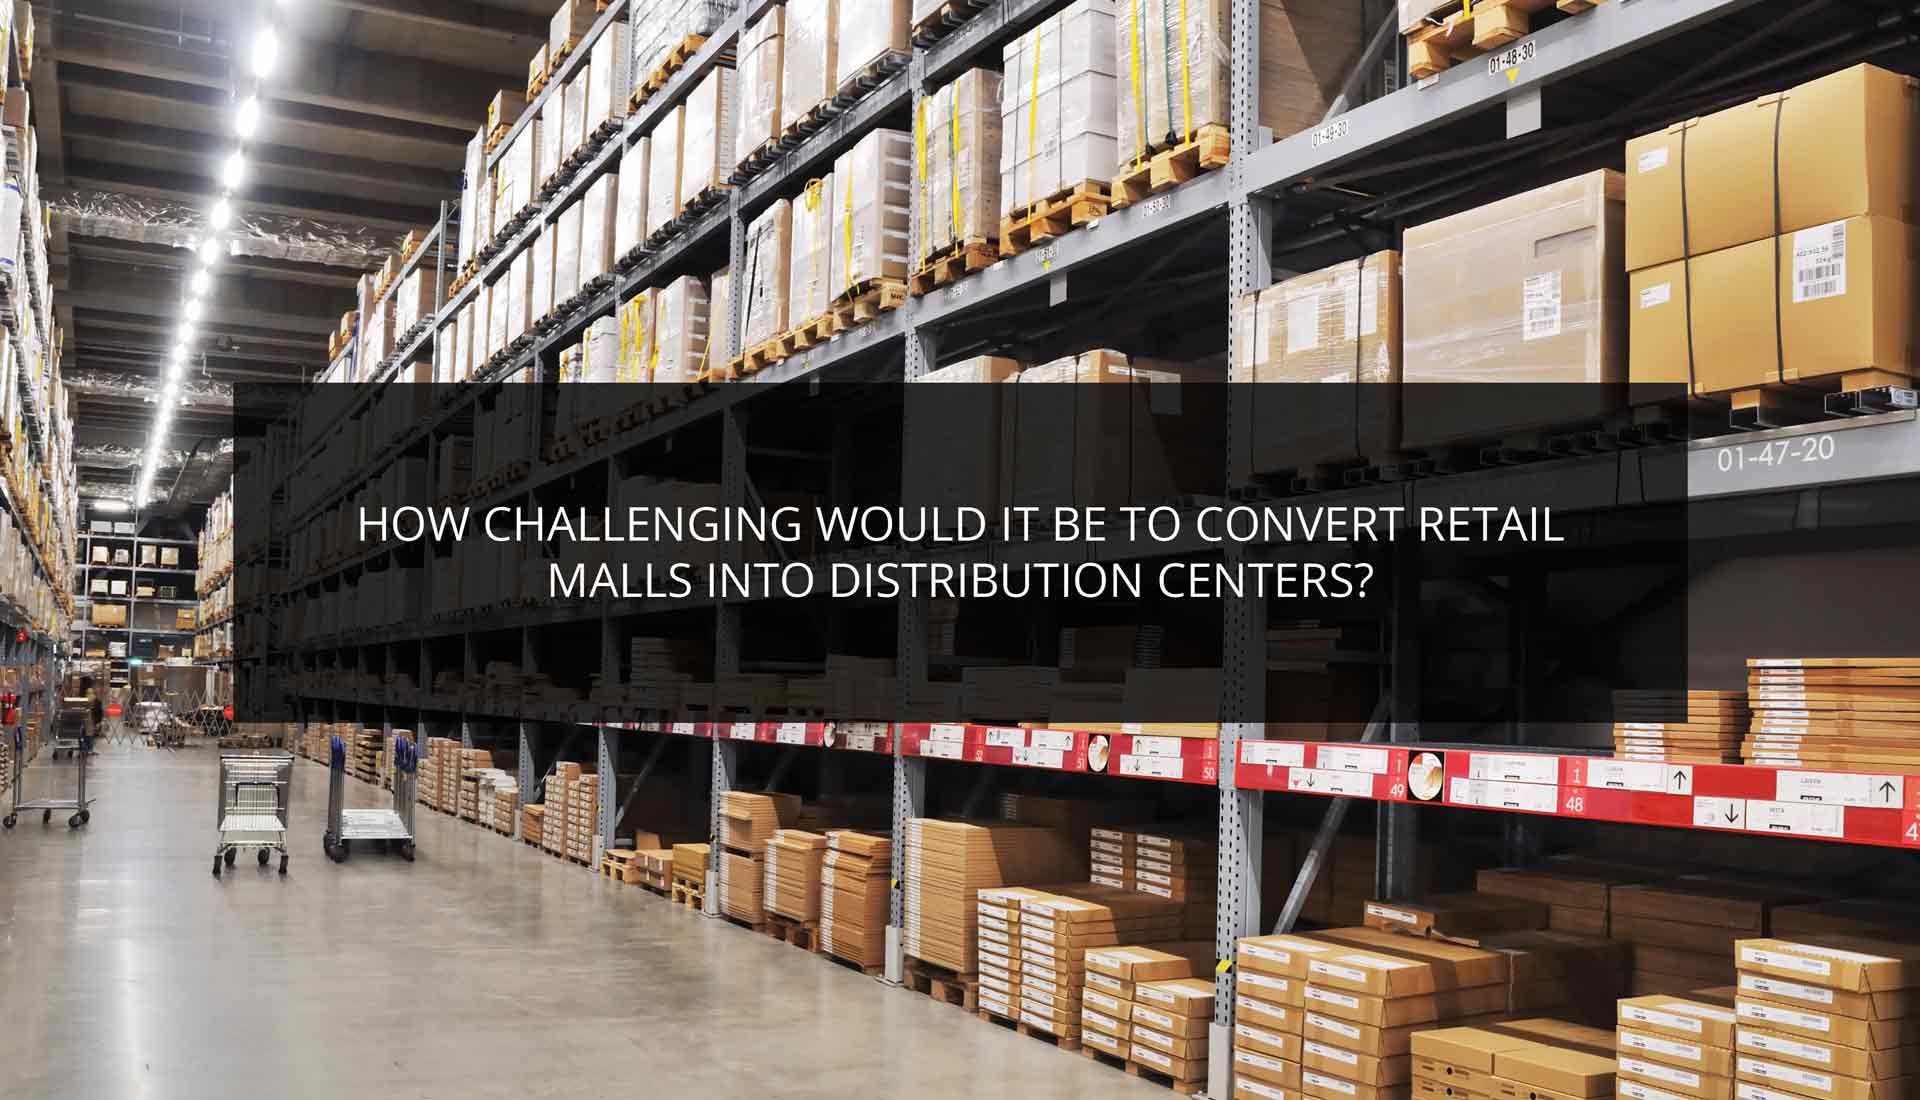 How Challenging Would It Be to Convert Retail Malls Into Distribution Centers?